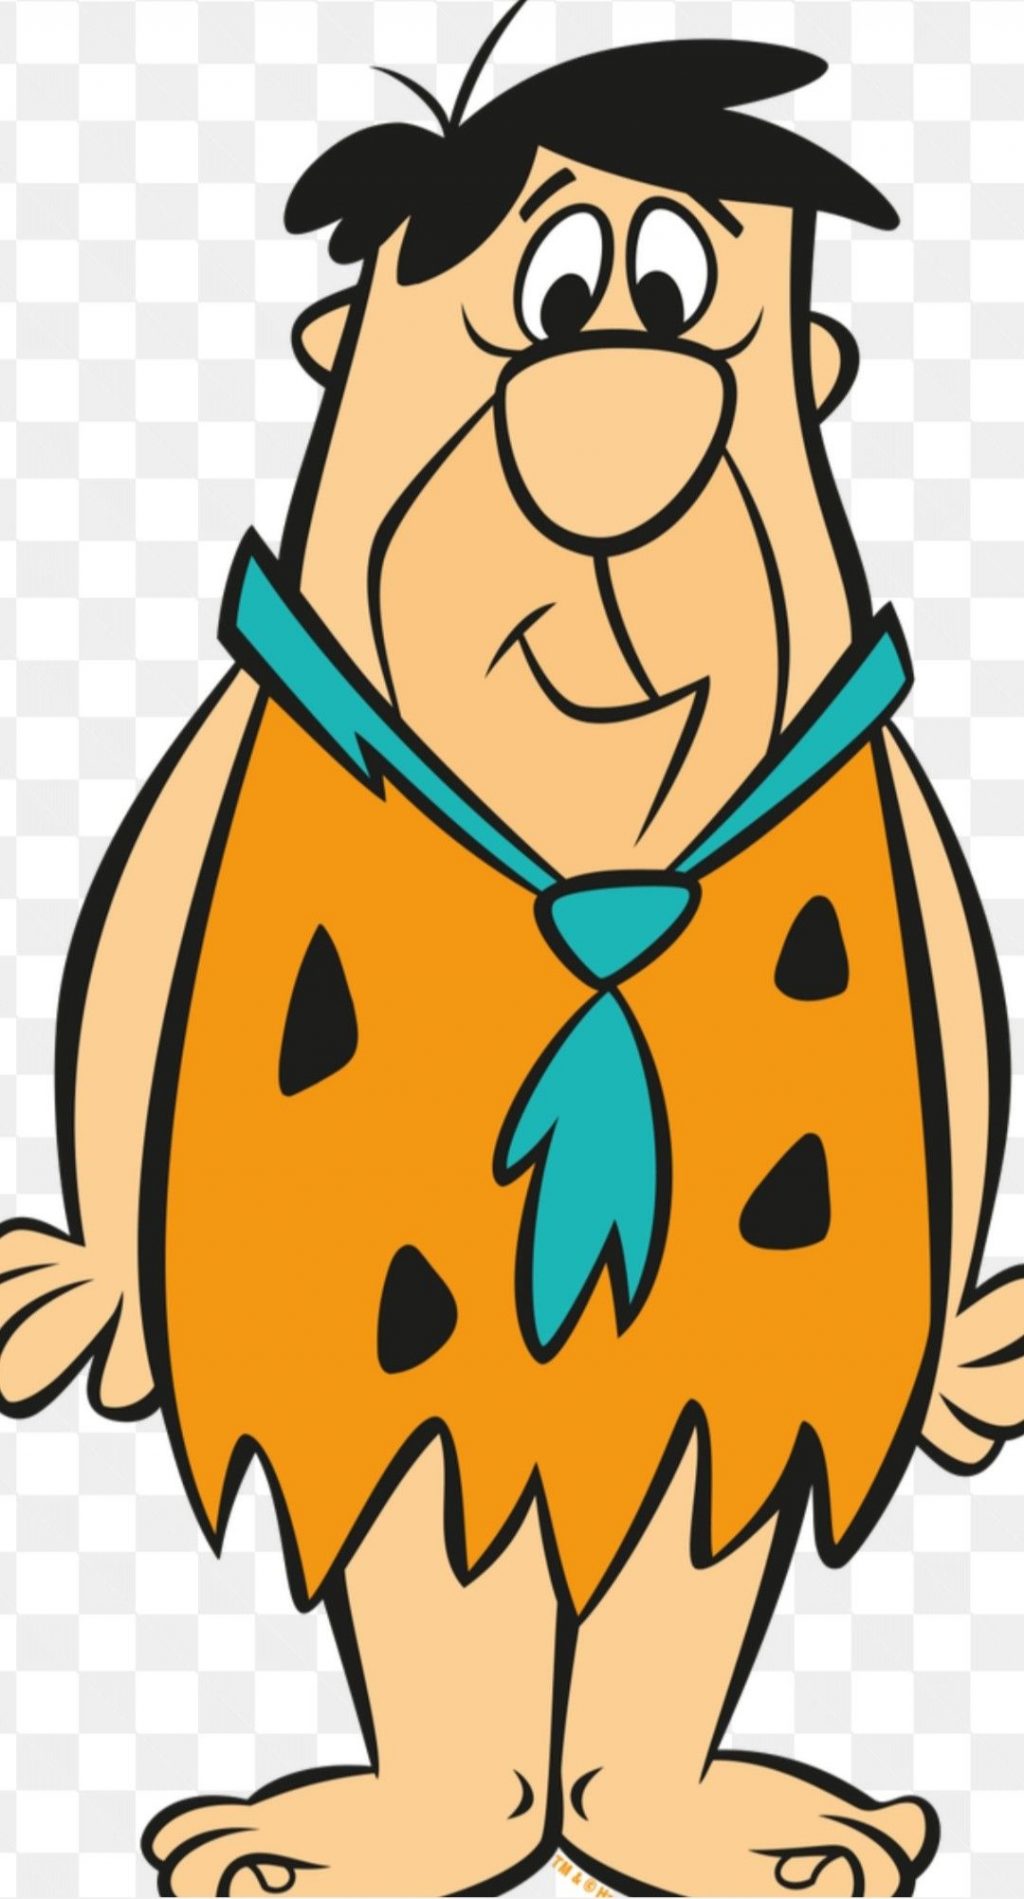 Fred-Flintstone-cartoon-675x1252 25+ Most Famous Cartoon Characters of All ...